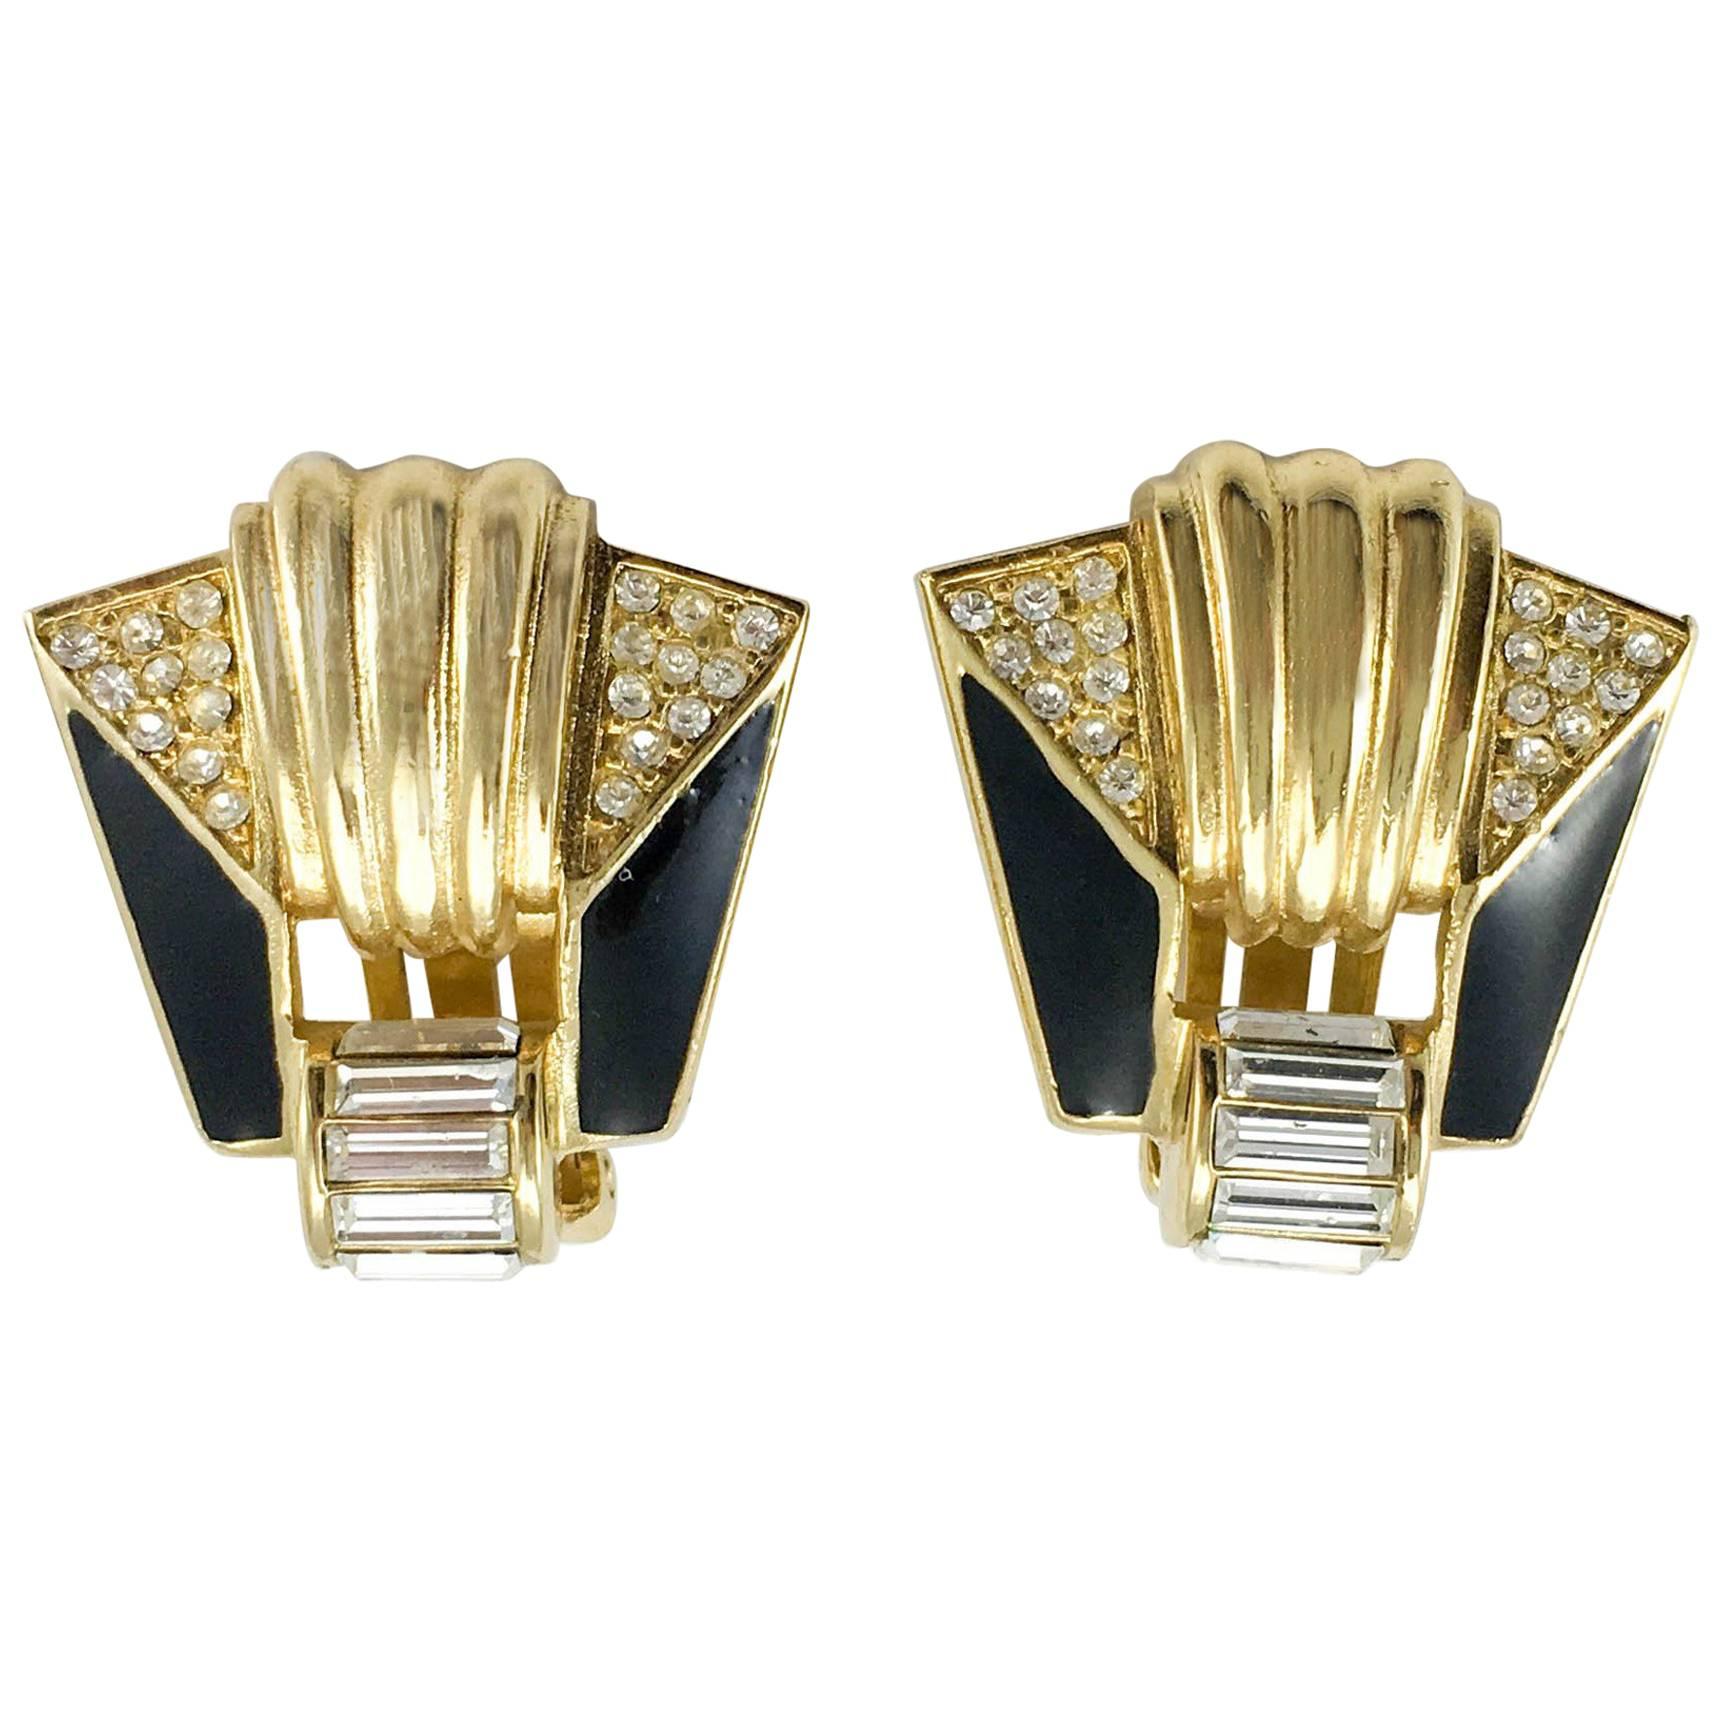 Dior Art Deco Style Gold-Plated Earrings - 1980's